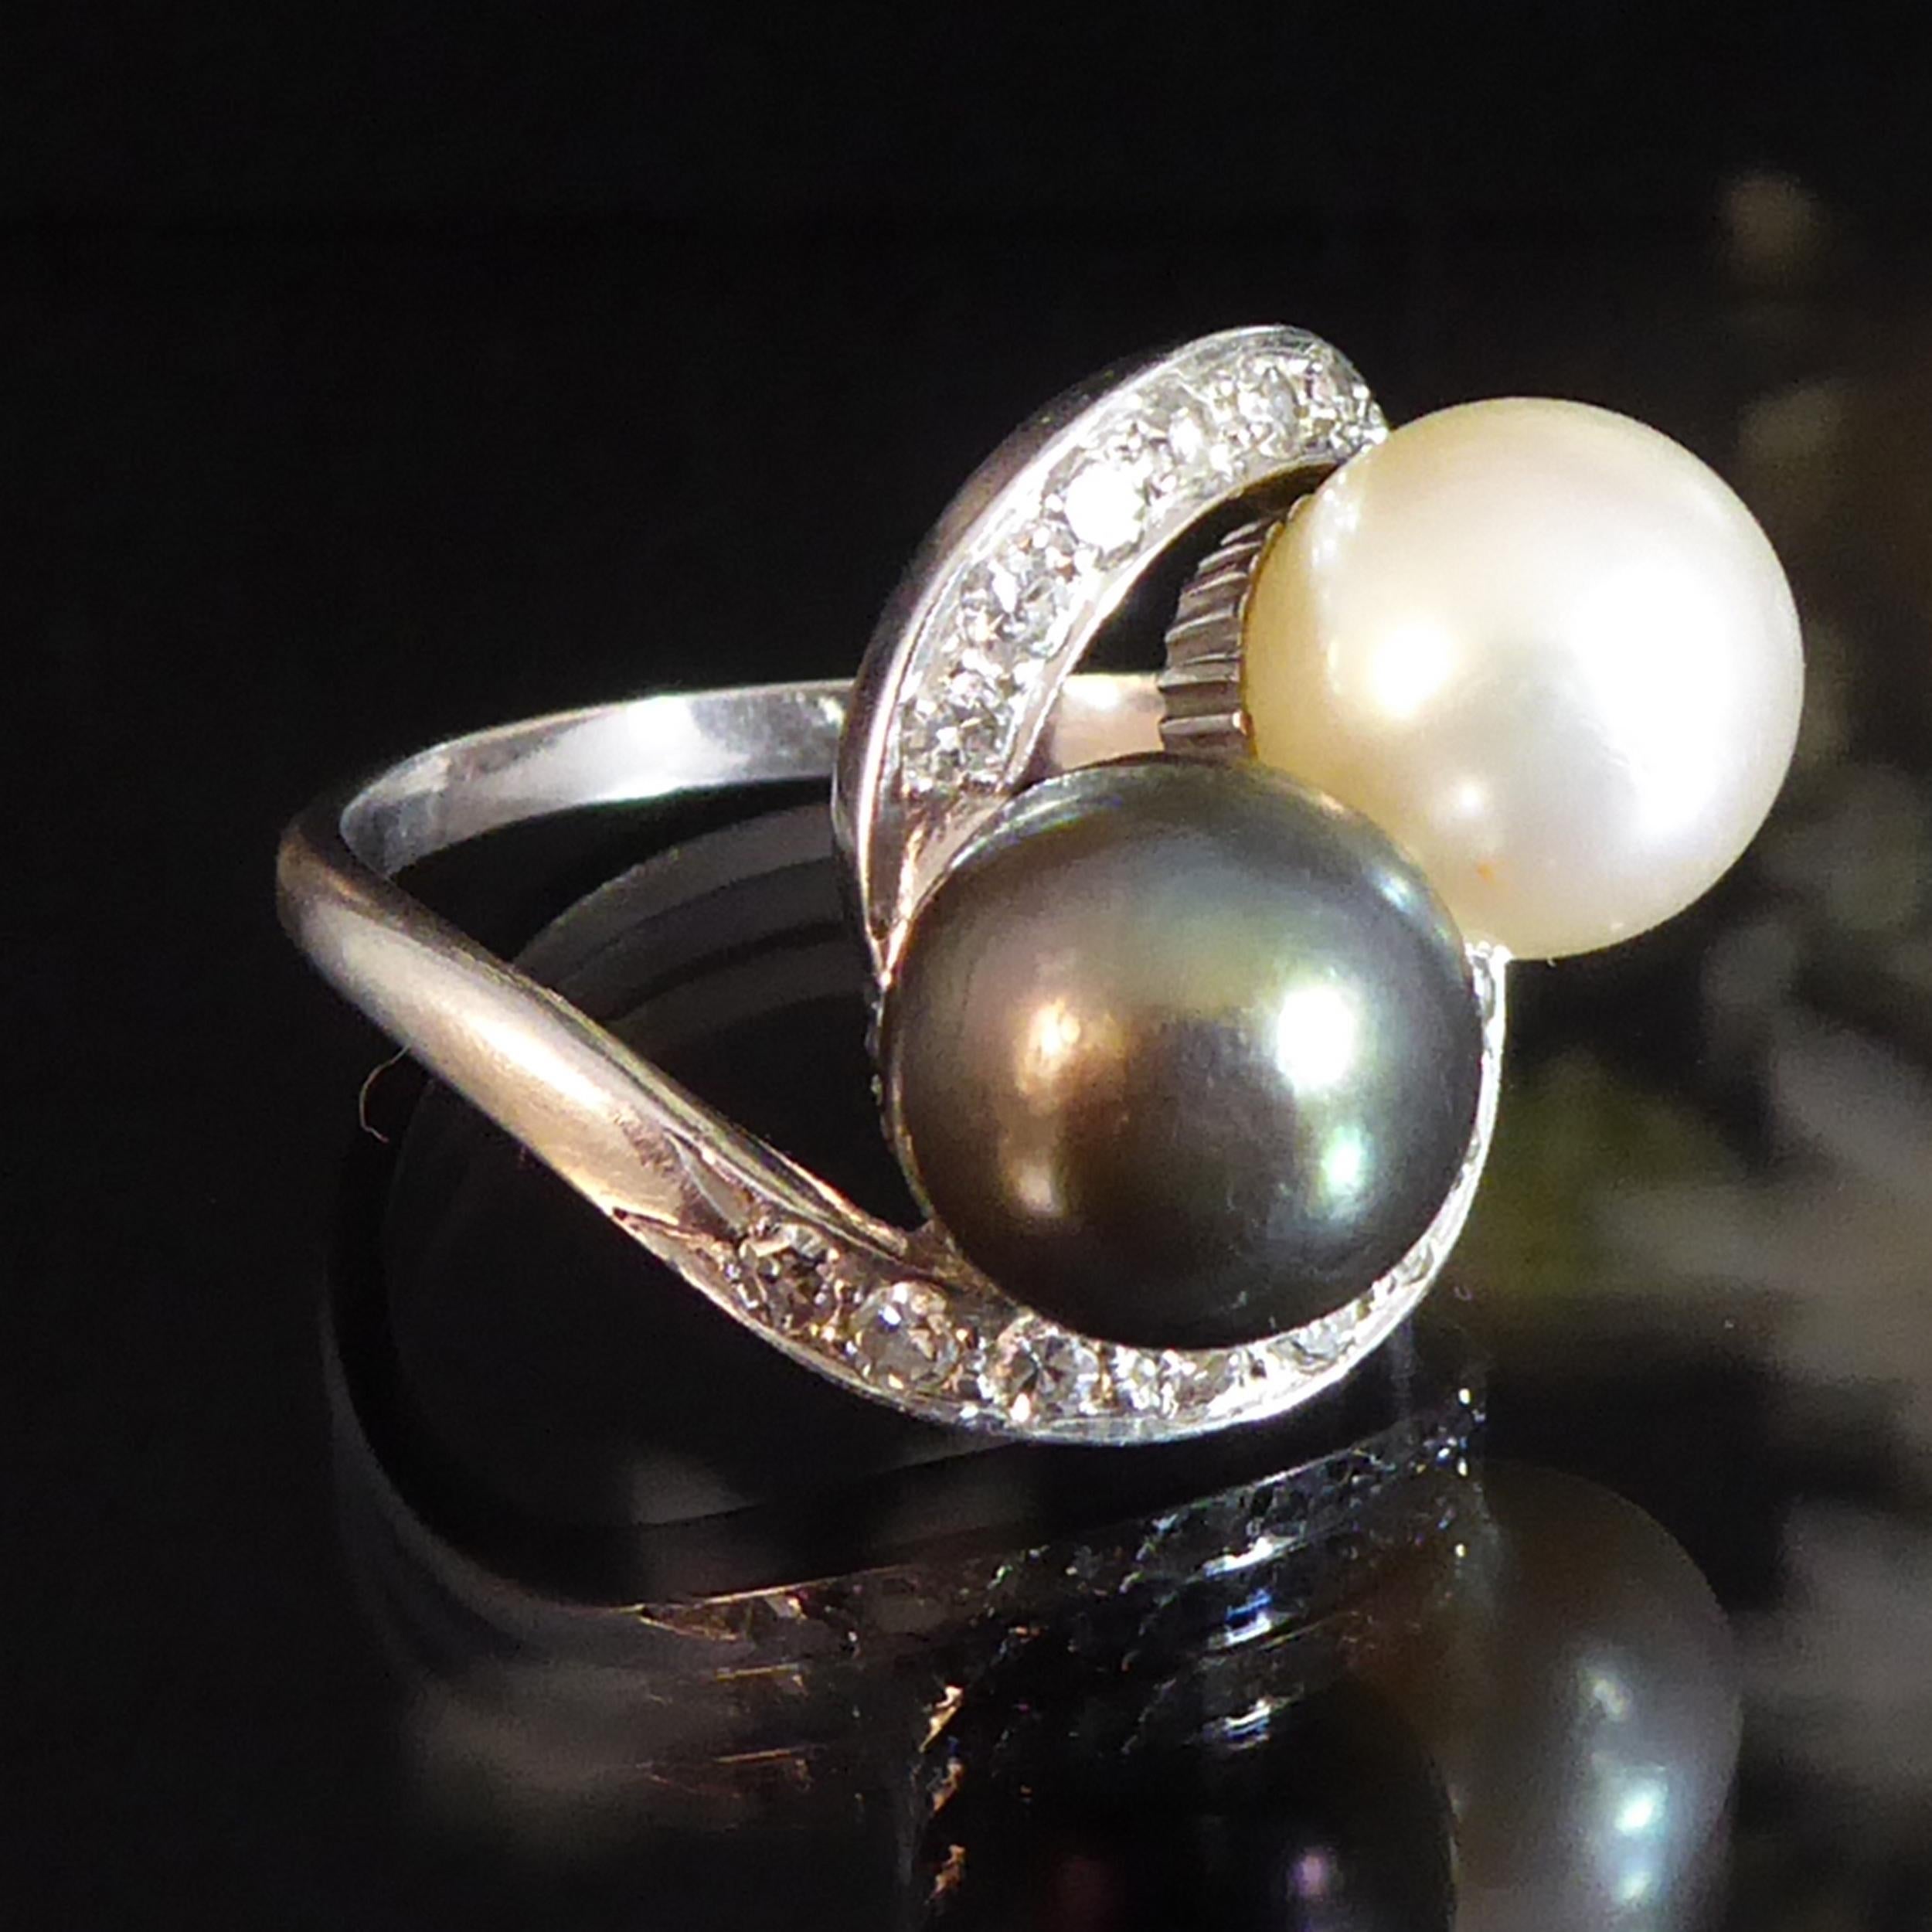 A vintage French design pearl and diamond cross-over twist ring giving a marvellous show on the hand.  Set with two principal pearls measuring 8.16mm and 833mm diameter, both assessed as Akoya, one in a cream colour with pink overtones the second